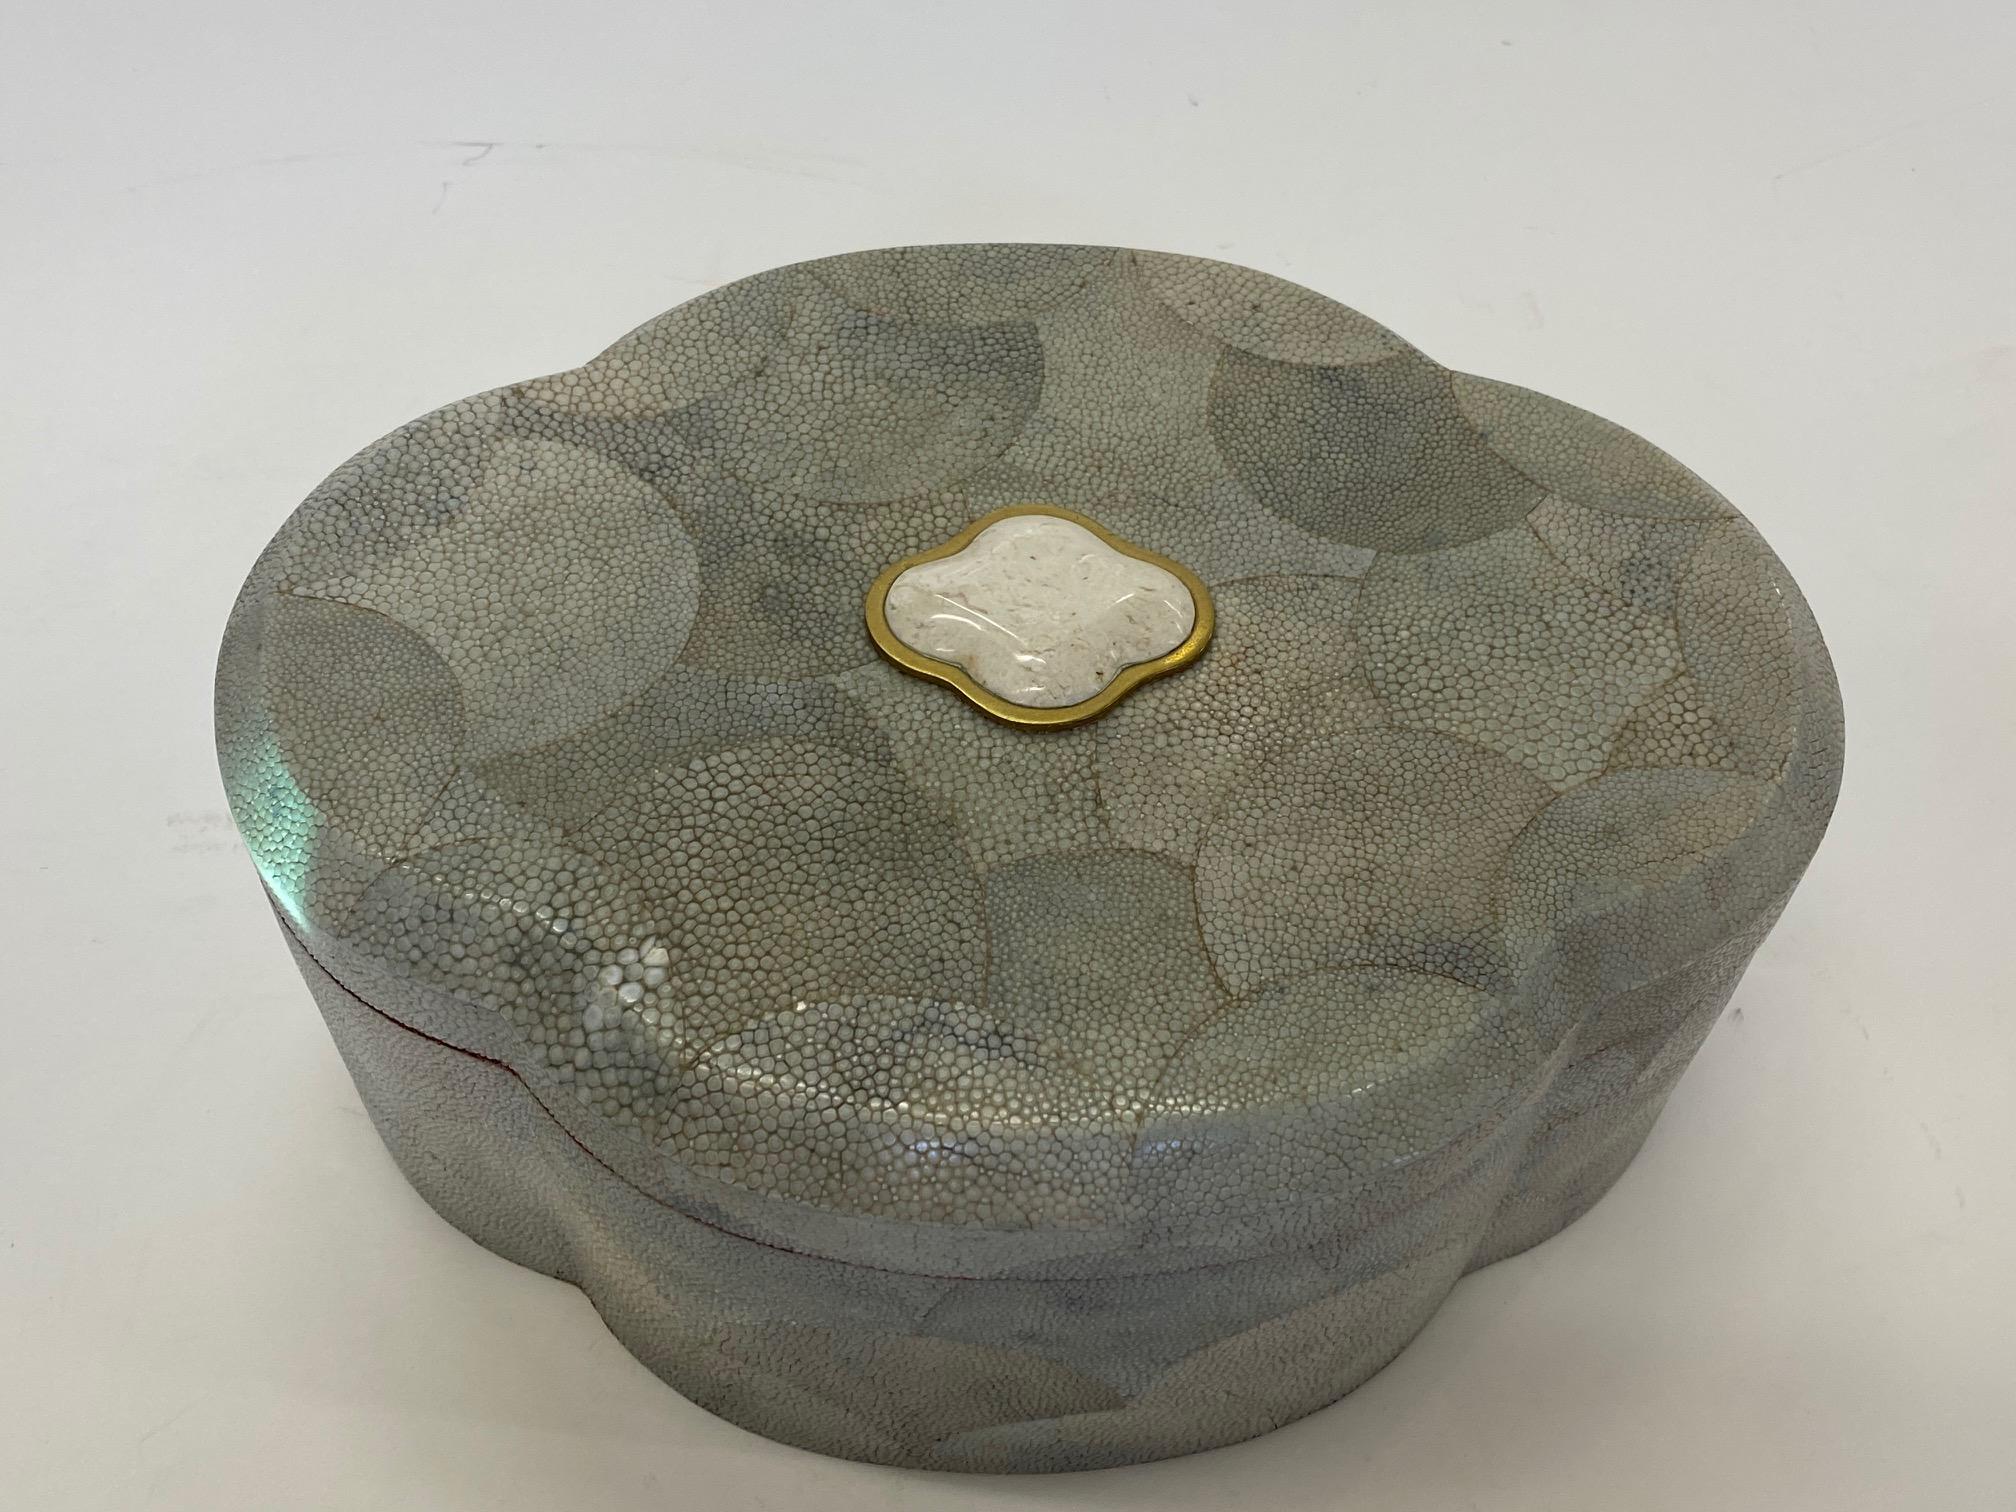 A generously sized beautifully crafted scalloped shaped shagreen lidded box having wooden interior and lovely bone decoration on top.